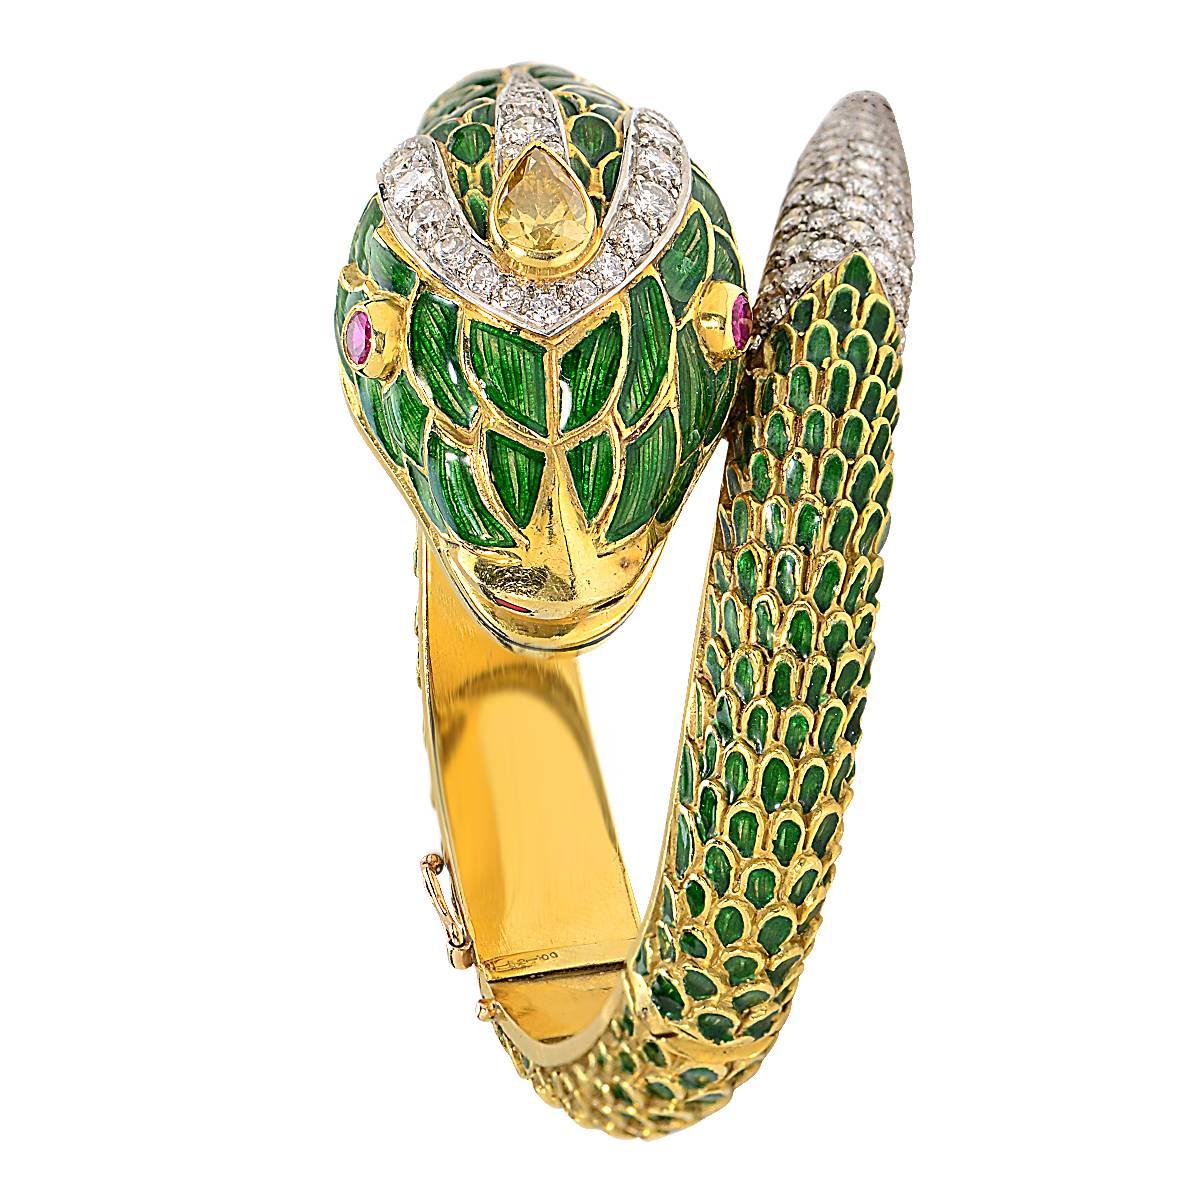 18 Karat Yellow Gold and Platinum Vintage Enamel Snake Bracelet Featuring 4.60 Carats of Round Brilliant Cut Diamonds, G Color, VS Clarity, and a .40 Carat Pear Shape Fancy Yellow Diamond.

Weight: 117.40 grams

This Bracelet is Accompanied by a